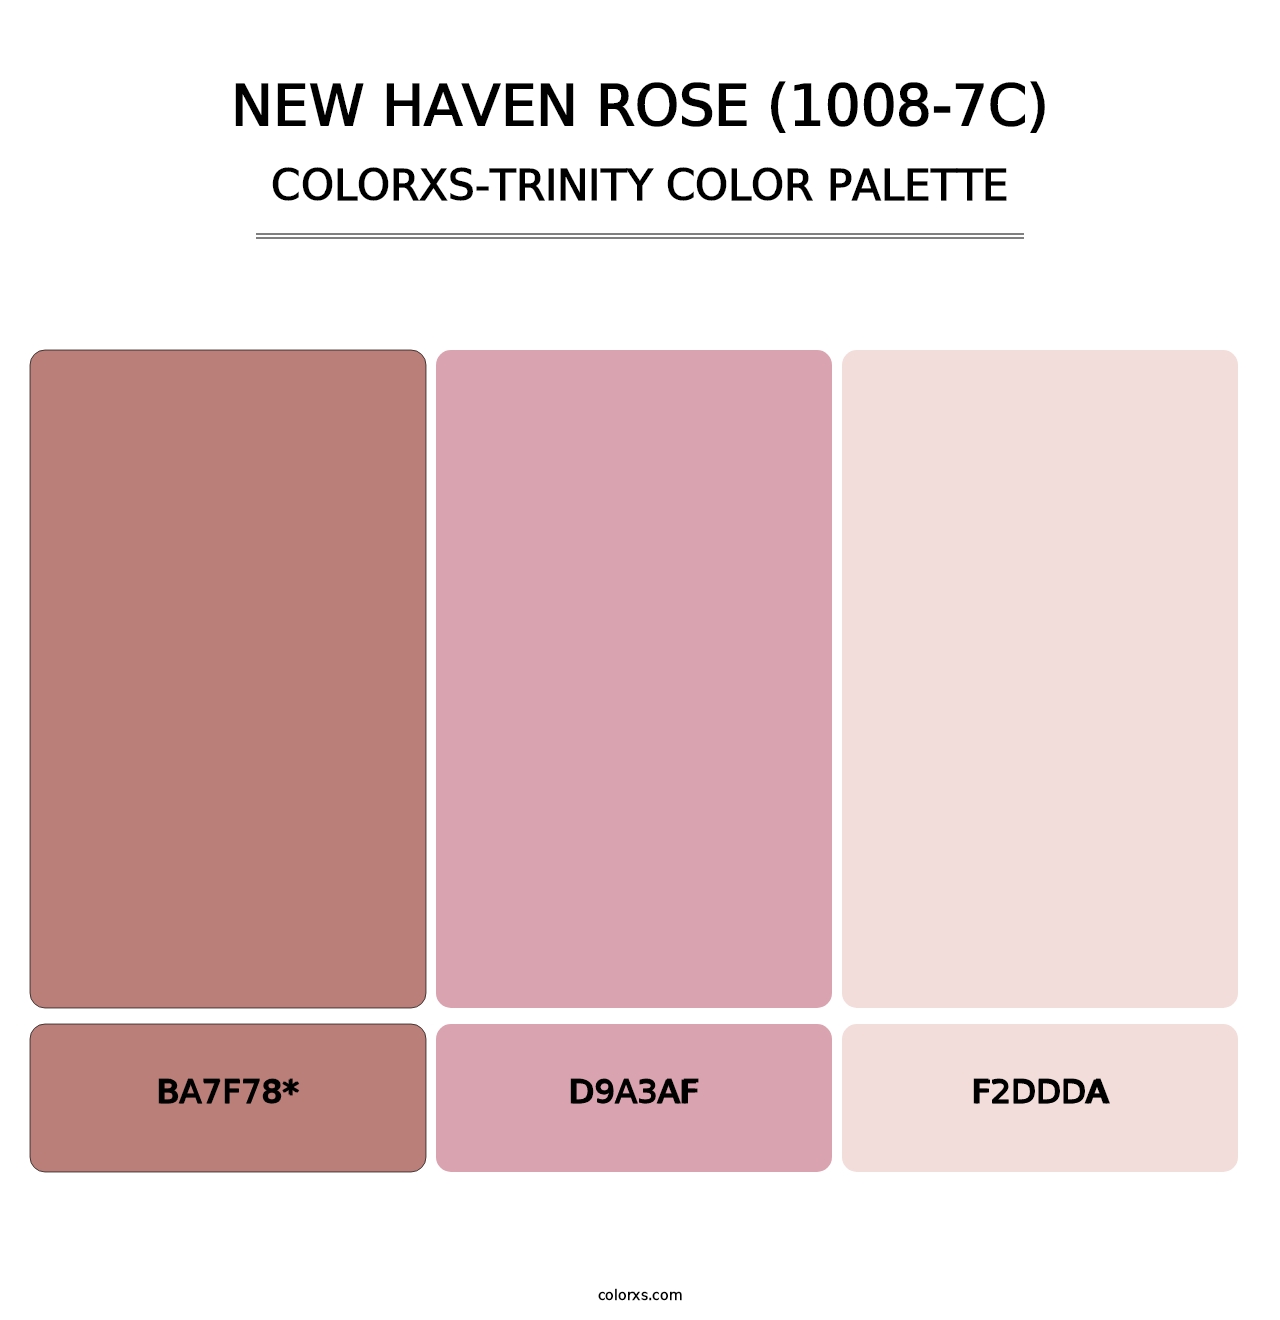 New Haven Rose (1008-7C) - Colorxs Trinity Palette